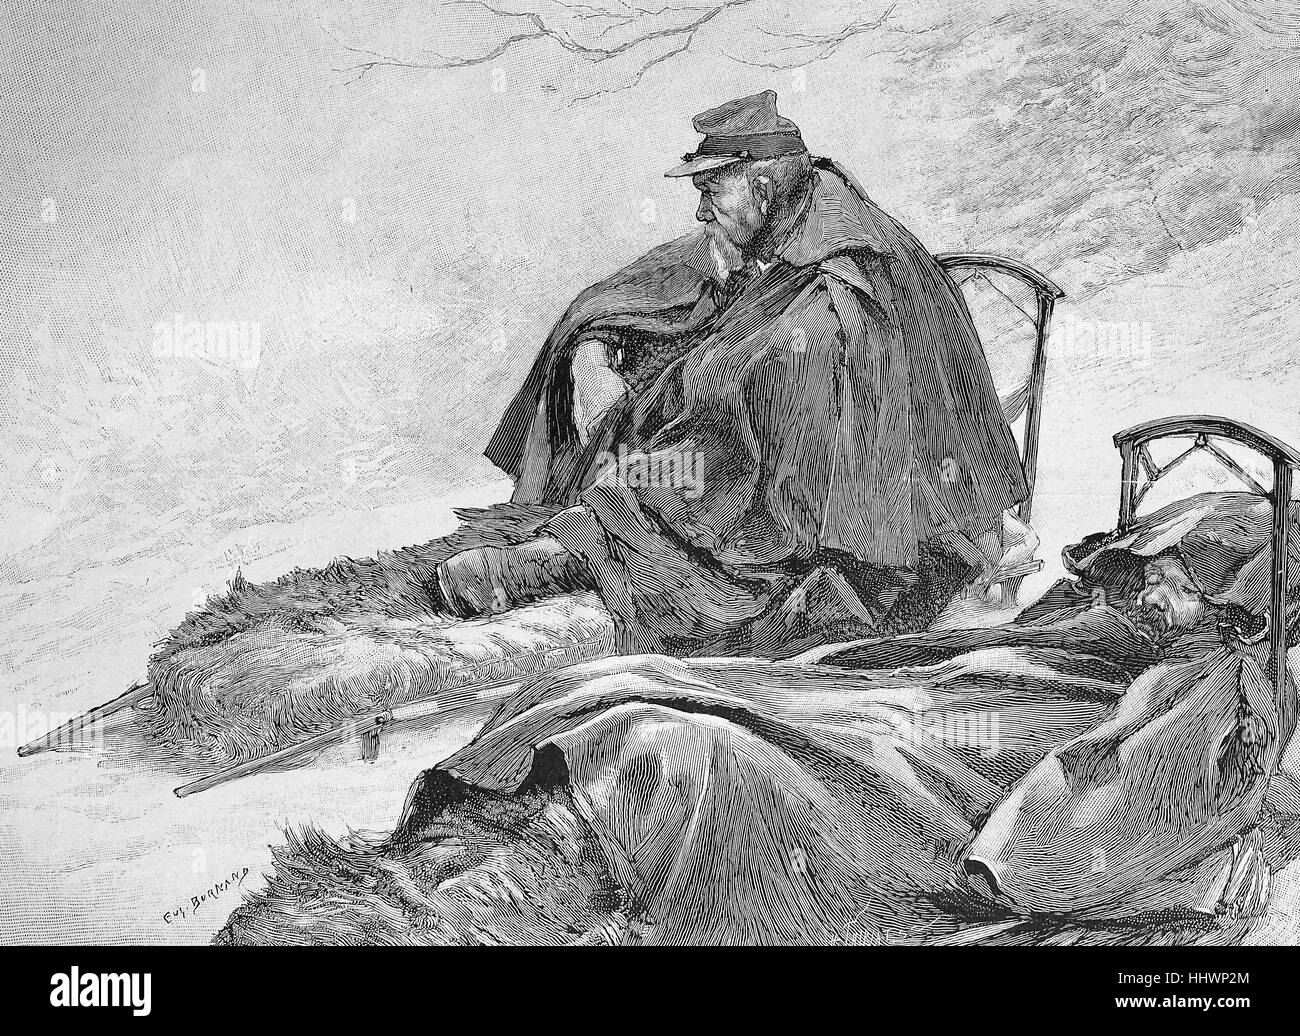 French customs guard at night service in winter in the countryside, France, historical image or illustration, published 1890, digital improved Stock Photo